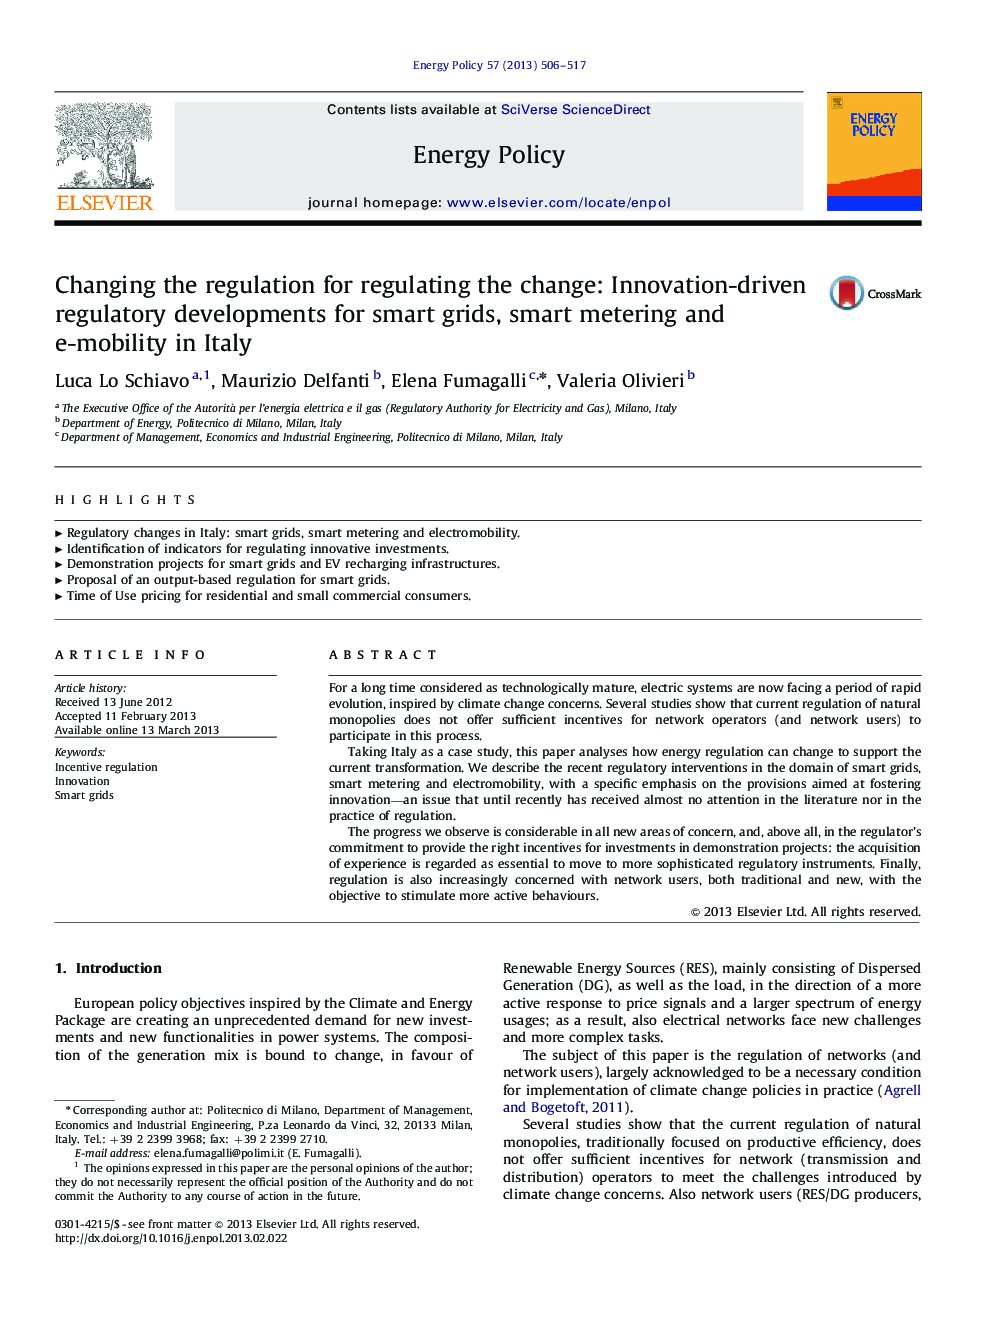 Changing the regulation for regulating the change: Innovation-driven regulatory developments for smart grids, smart metering and e-mobility in Italy